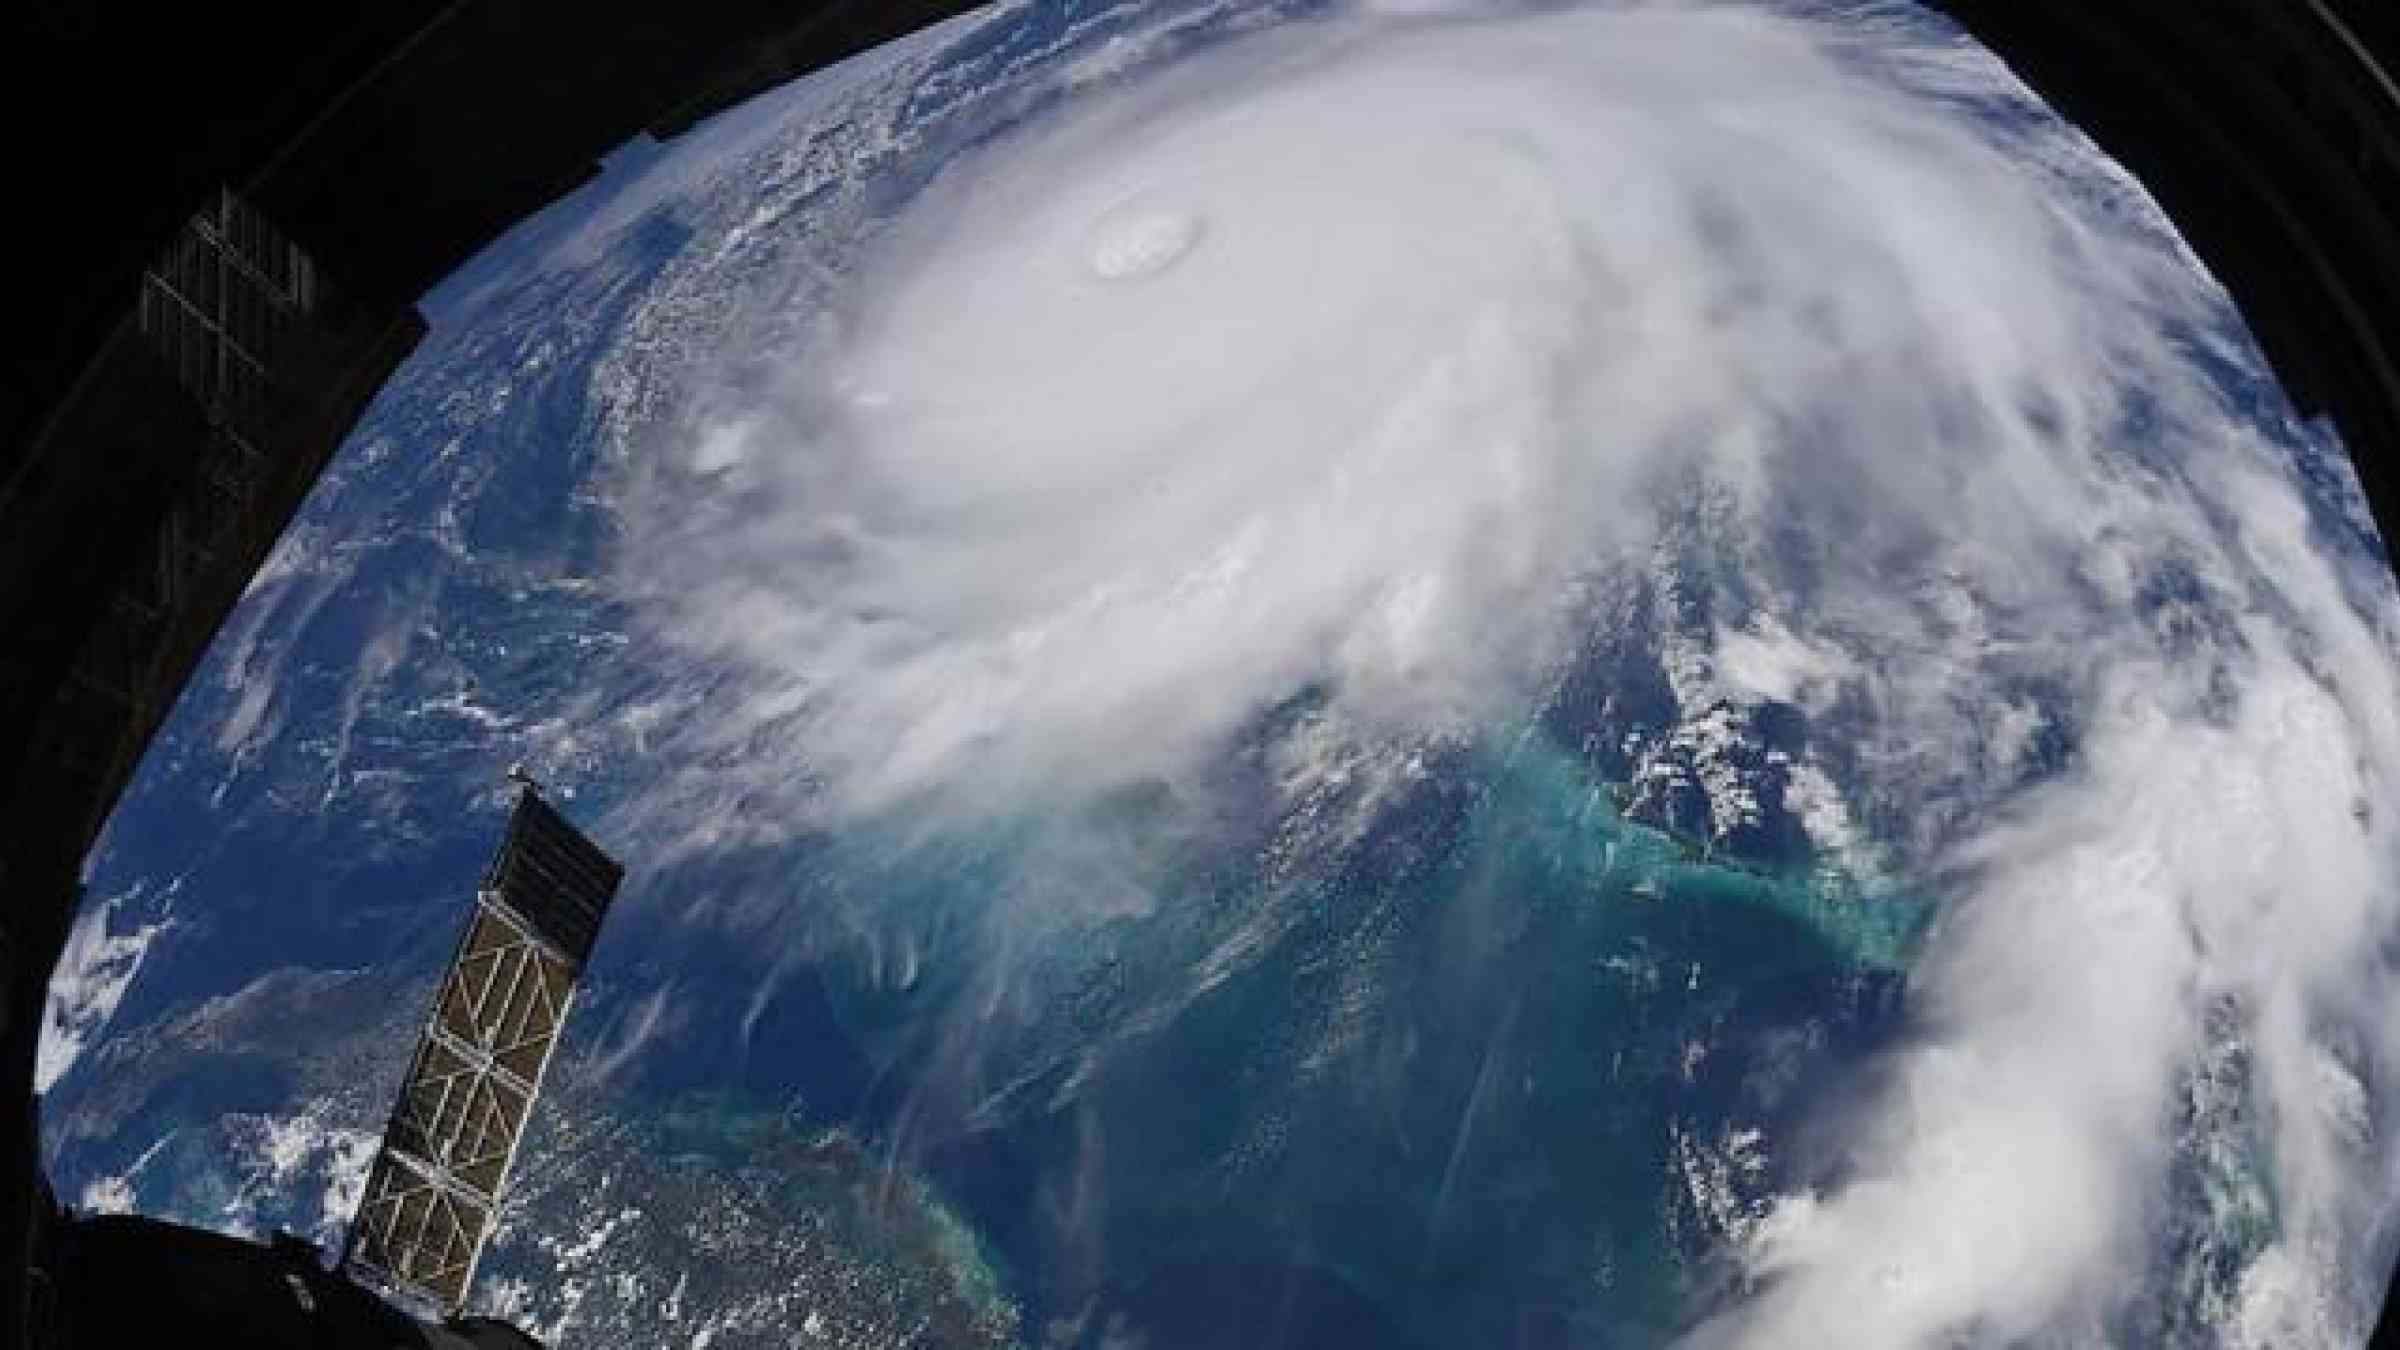 Hurricane Dorian as a category five storm viewed from space - NASA image